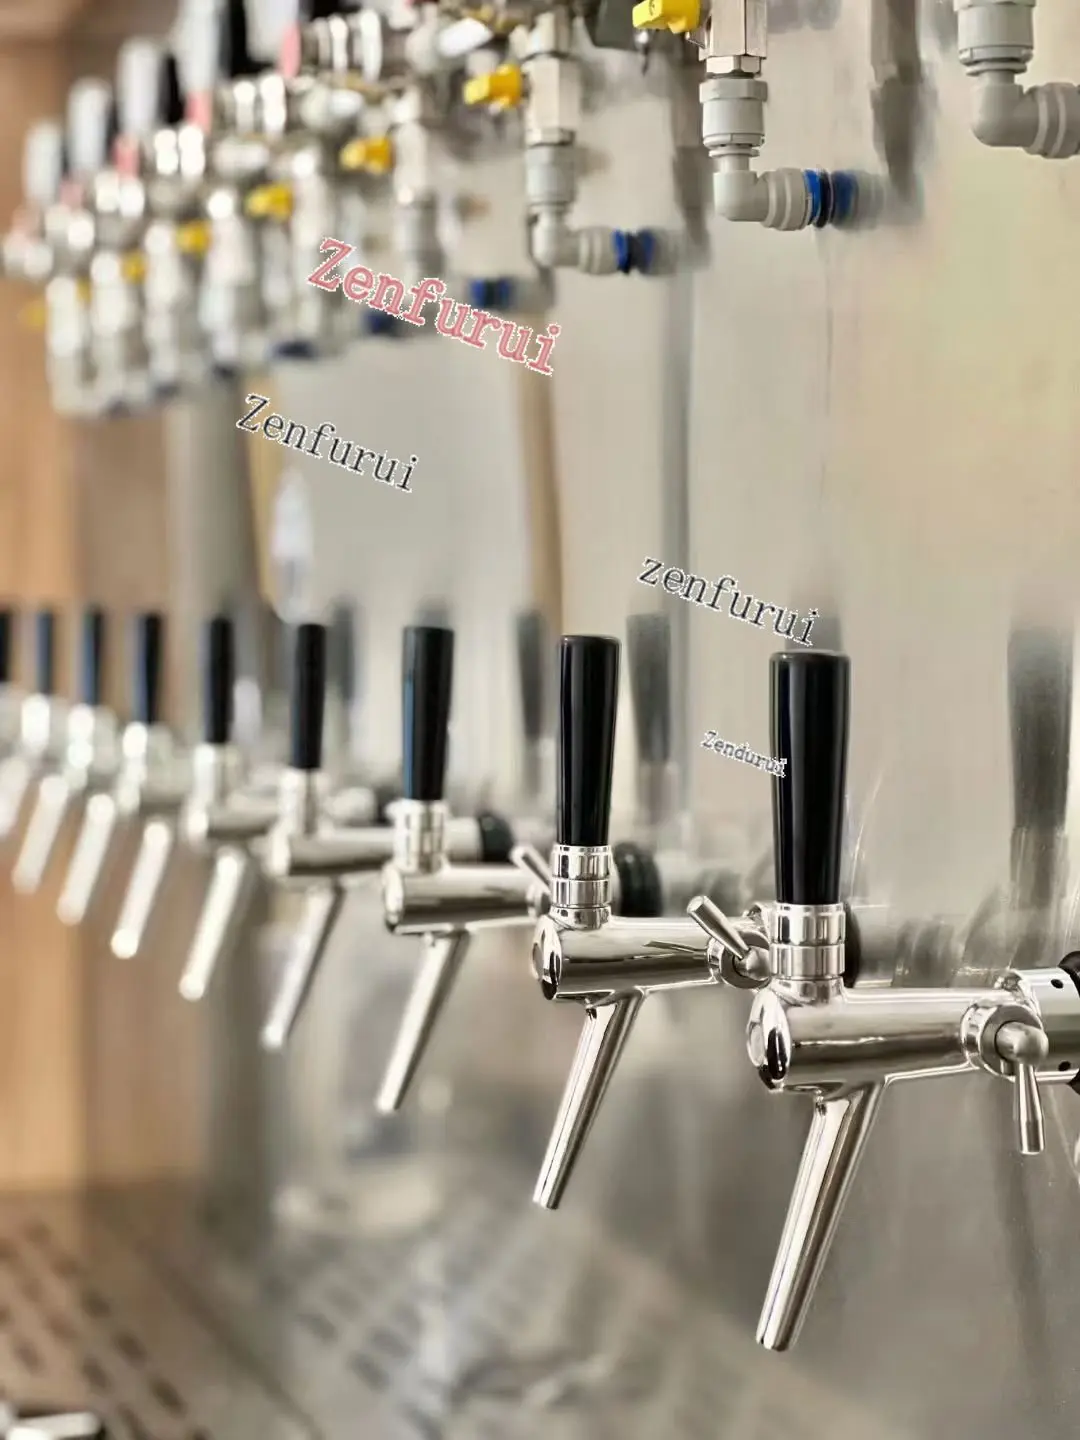 

304 Stainless Steel Craft Beer Faucet Foreshots Beer Wall Macro Foreshots Adjustable Defoaming Draught Beer Machine Faucet